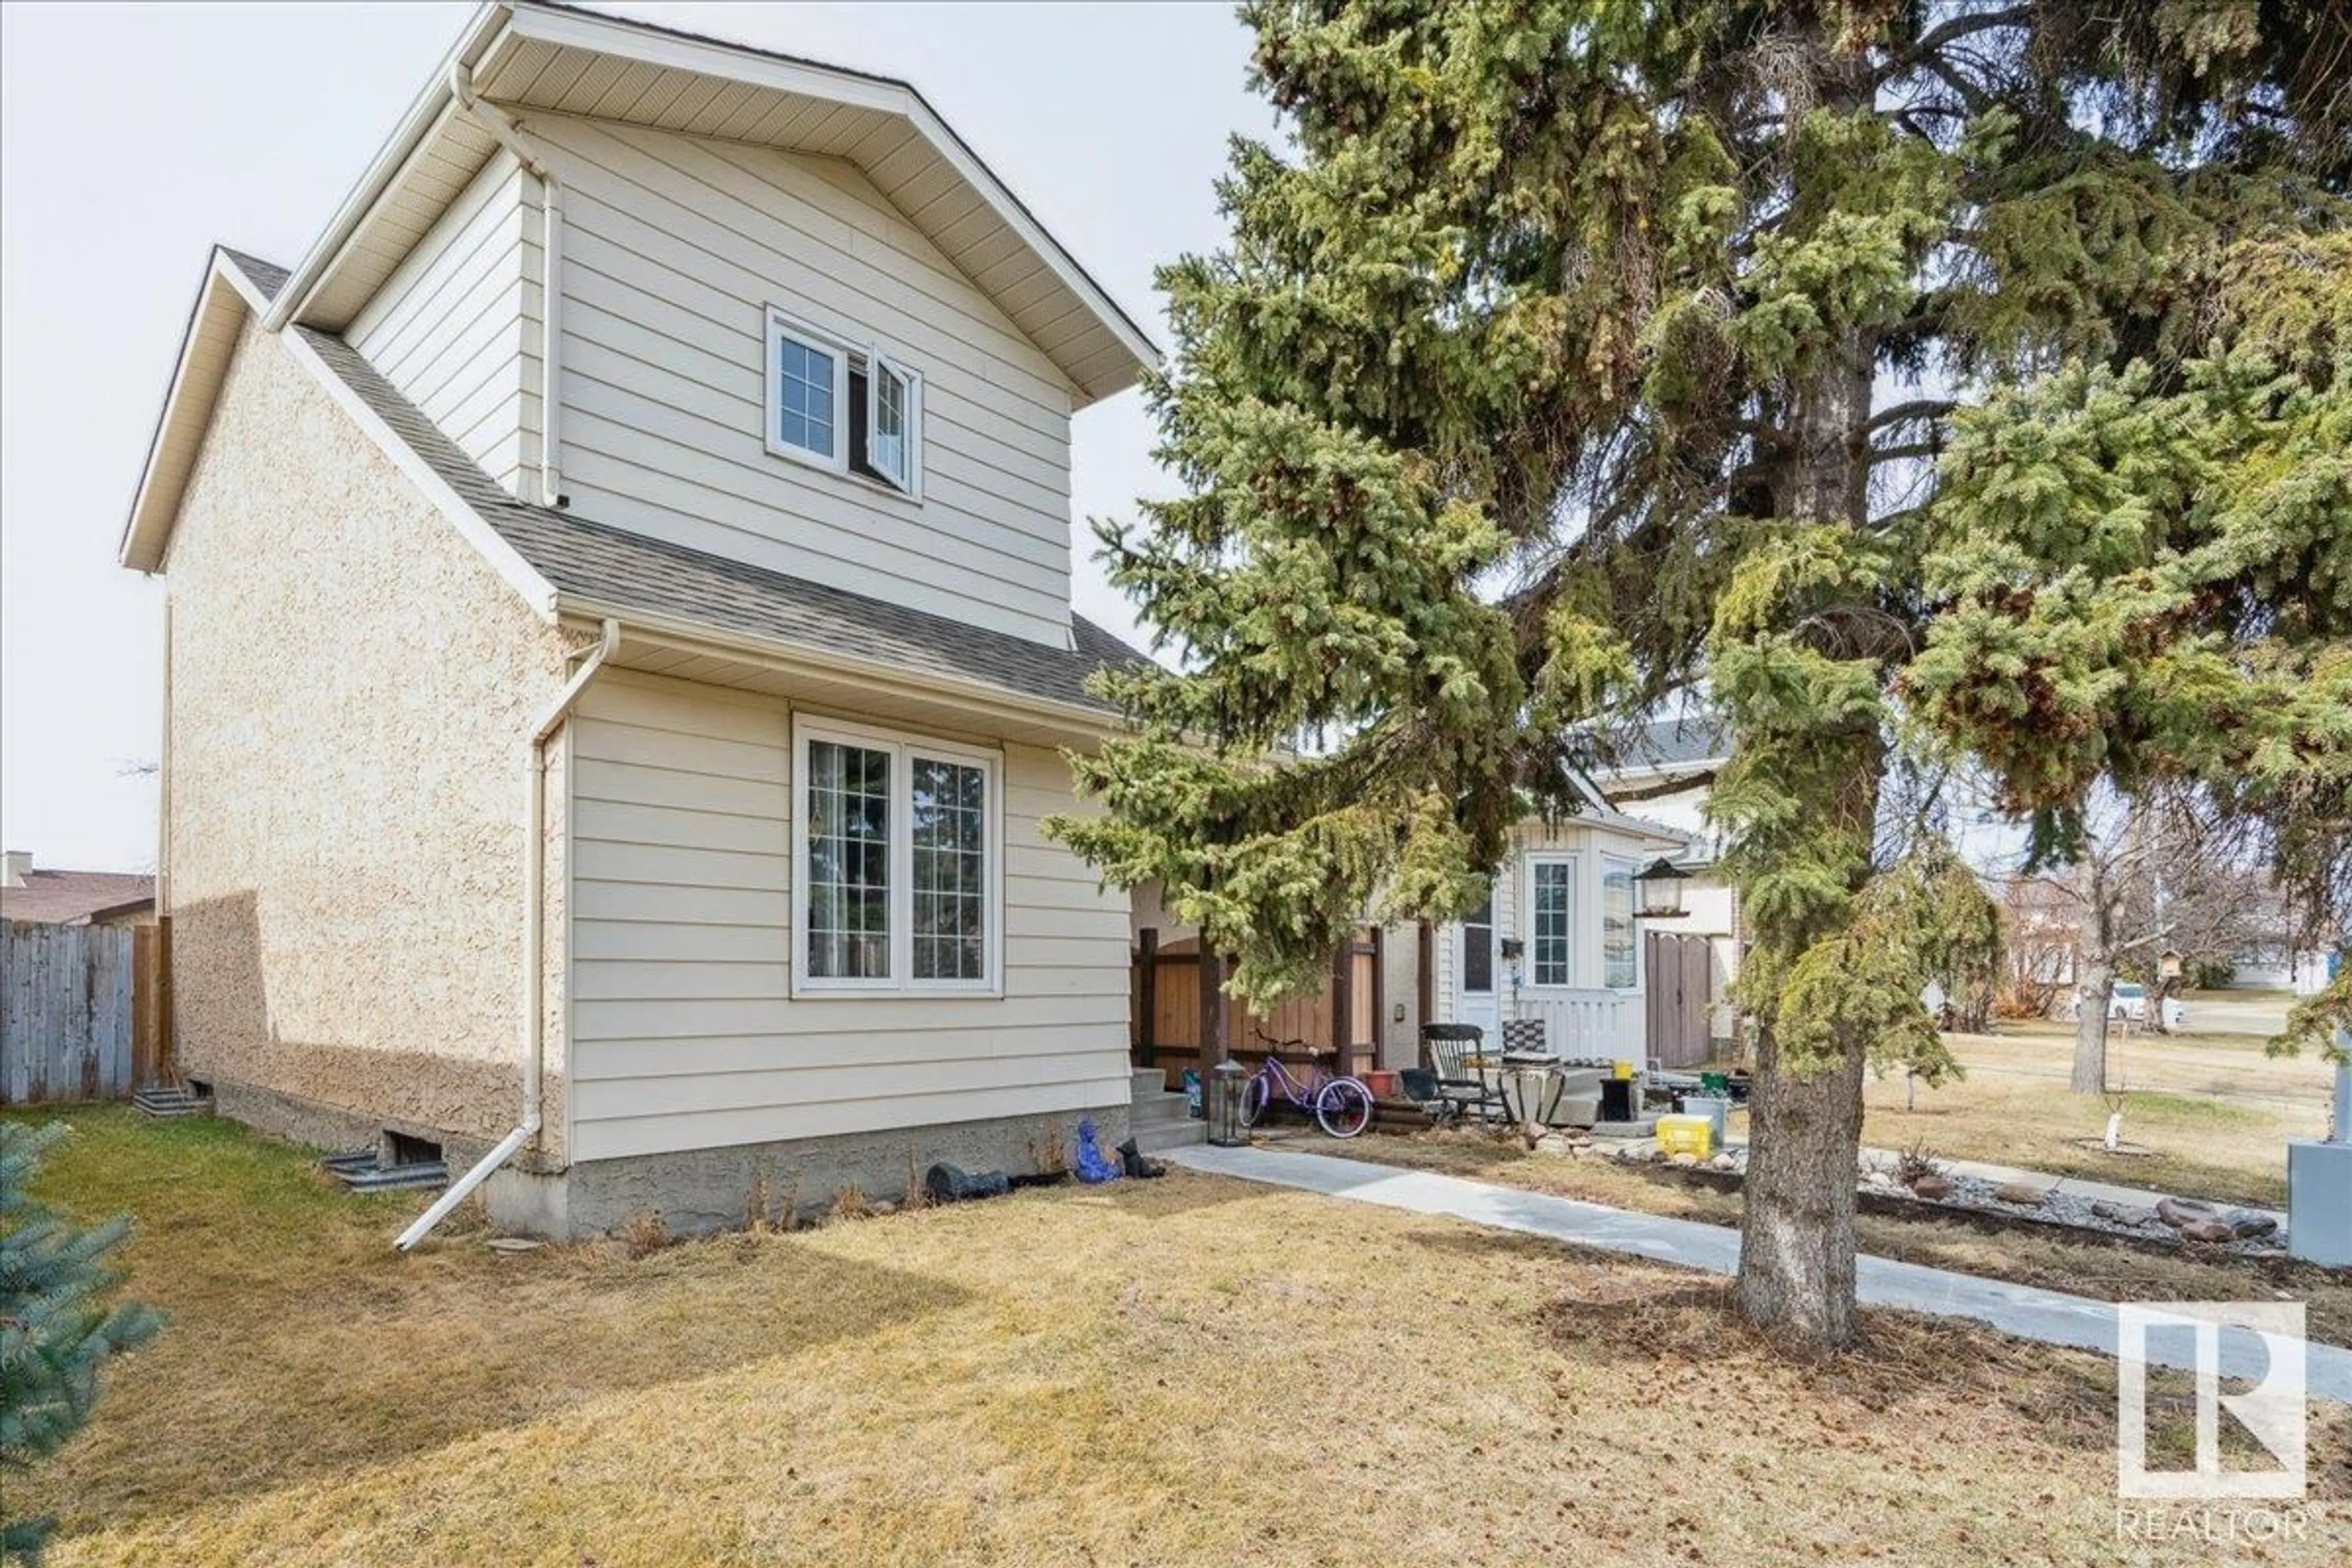 A pic from exterior of the house or condo for 4132 36 ST NW, Edmonton Alberta T6L5M6